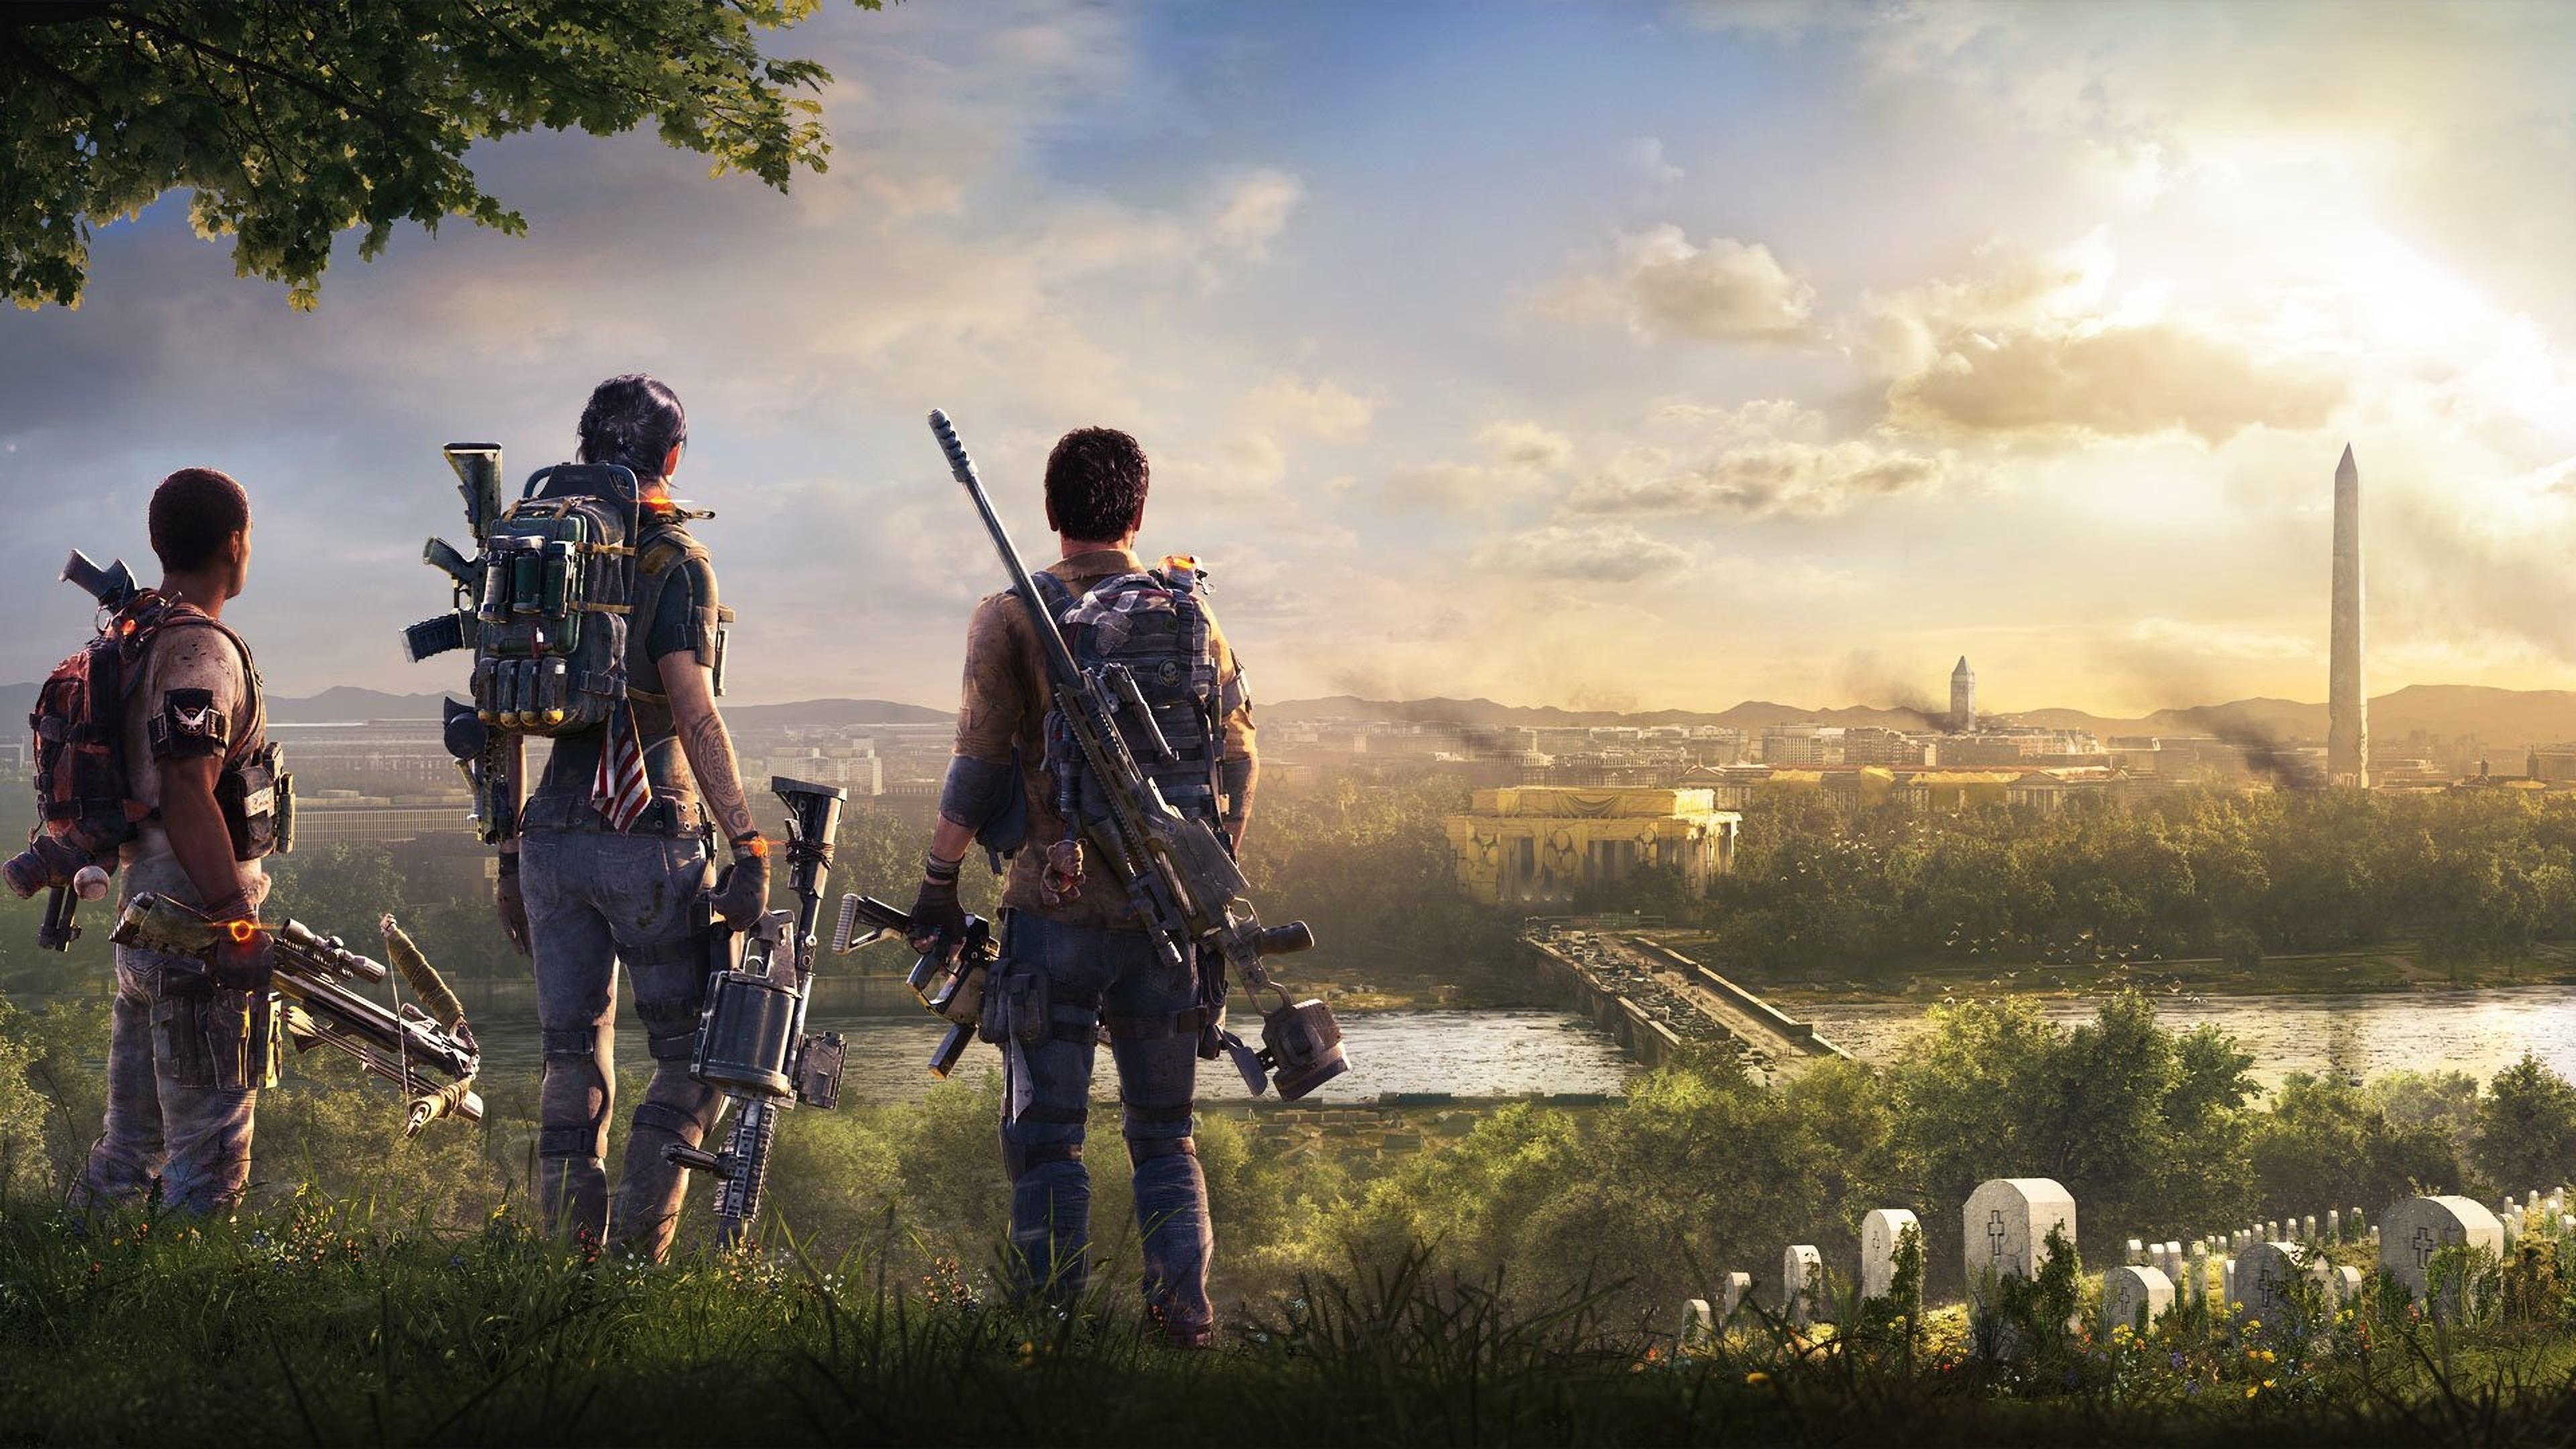 TC's The Division 2 [3840x2160] #Music #IndieArtist #Chicago